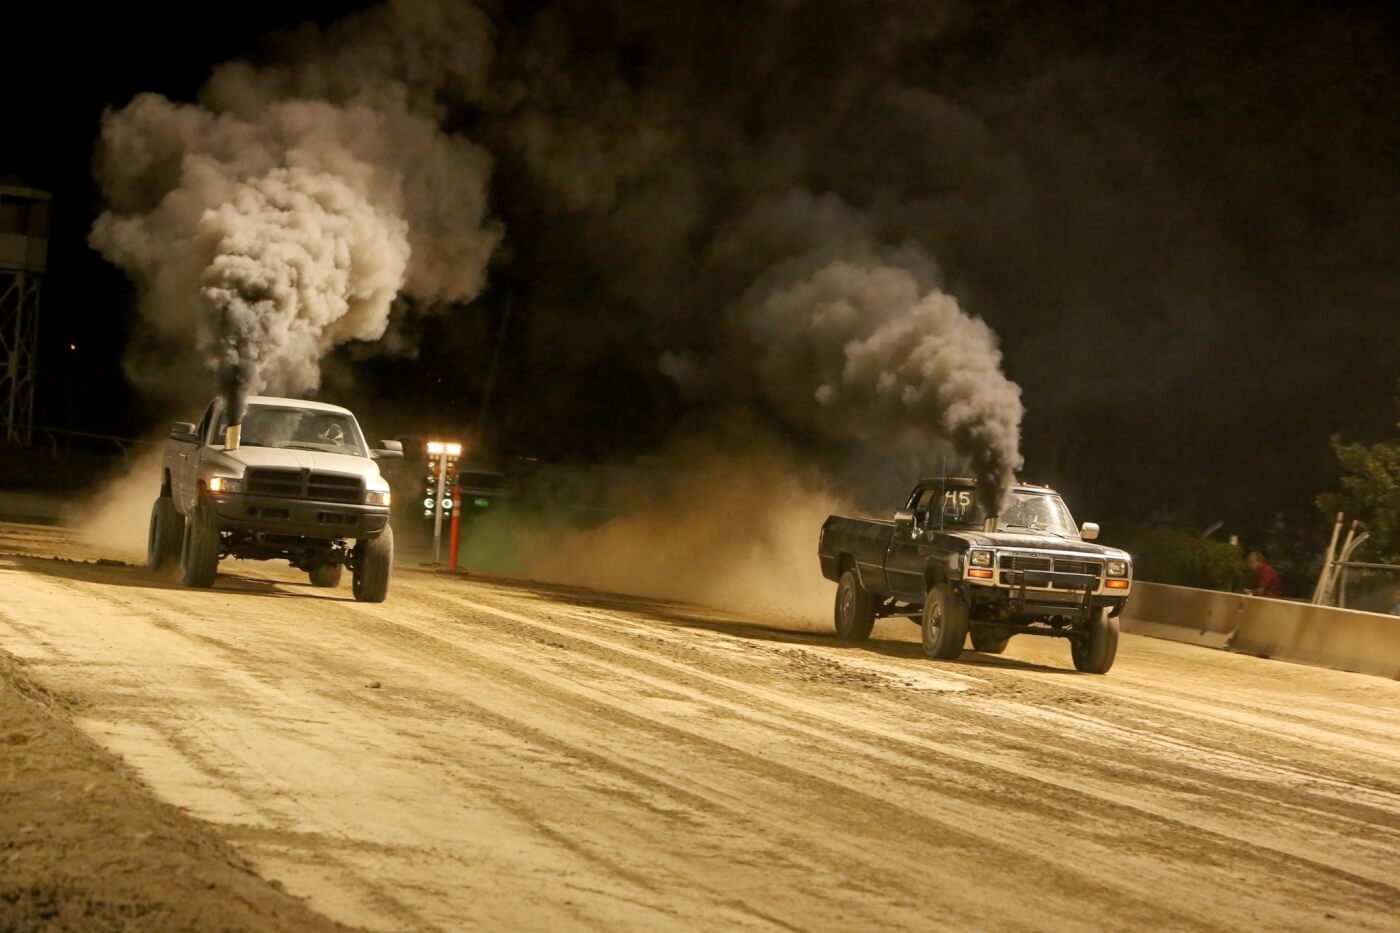 The dirt drags ran late into the night and made for a great show for the crowd. These two big Cummins trucks may not be completely street legal thanks to those awesome hood stacks, but that won’t keep them from having some fun off-road.